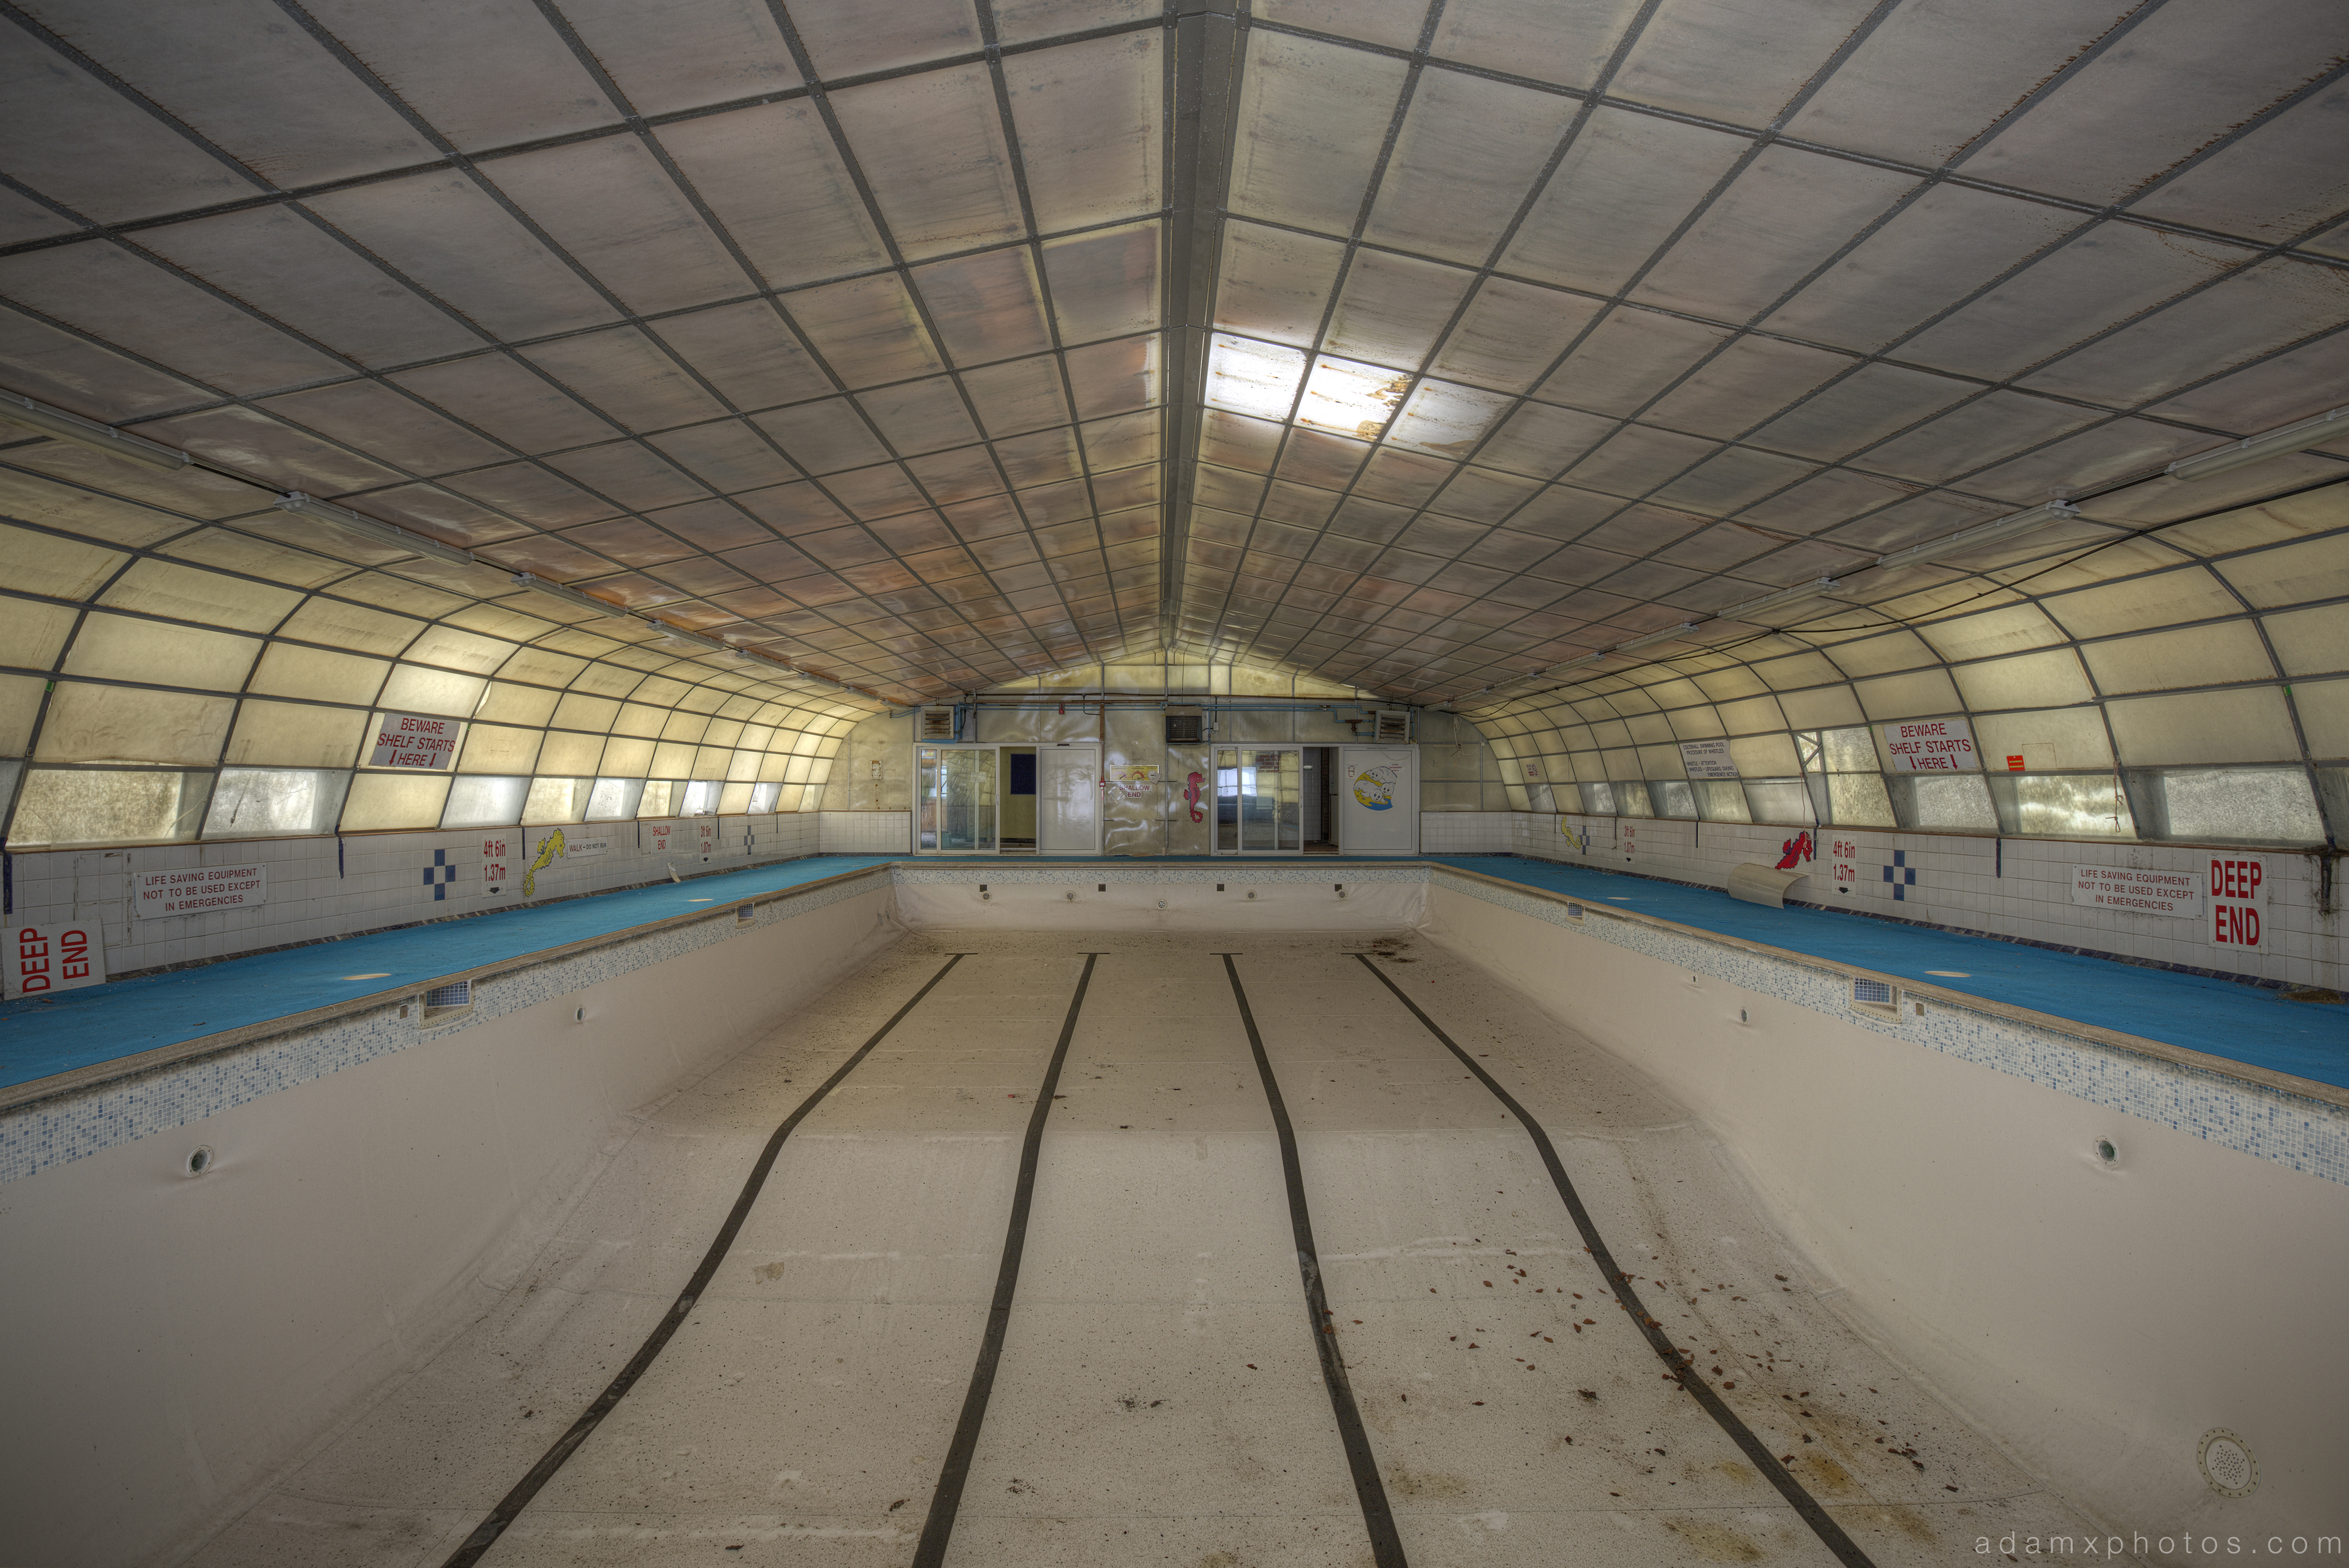 Swimming pool RAF Coltishall urbex urban exploration Adam X photos photographs photography report abandoned disused derelict forgotten decay decaying history